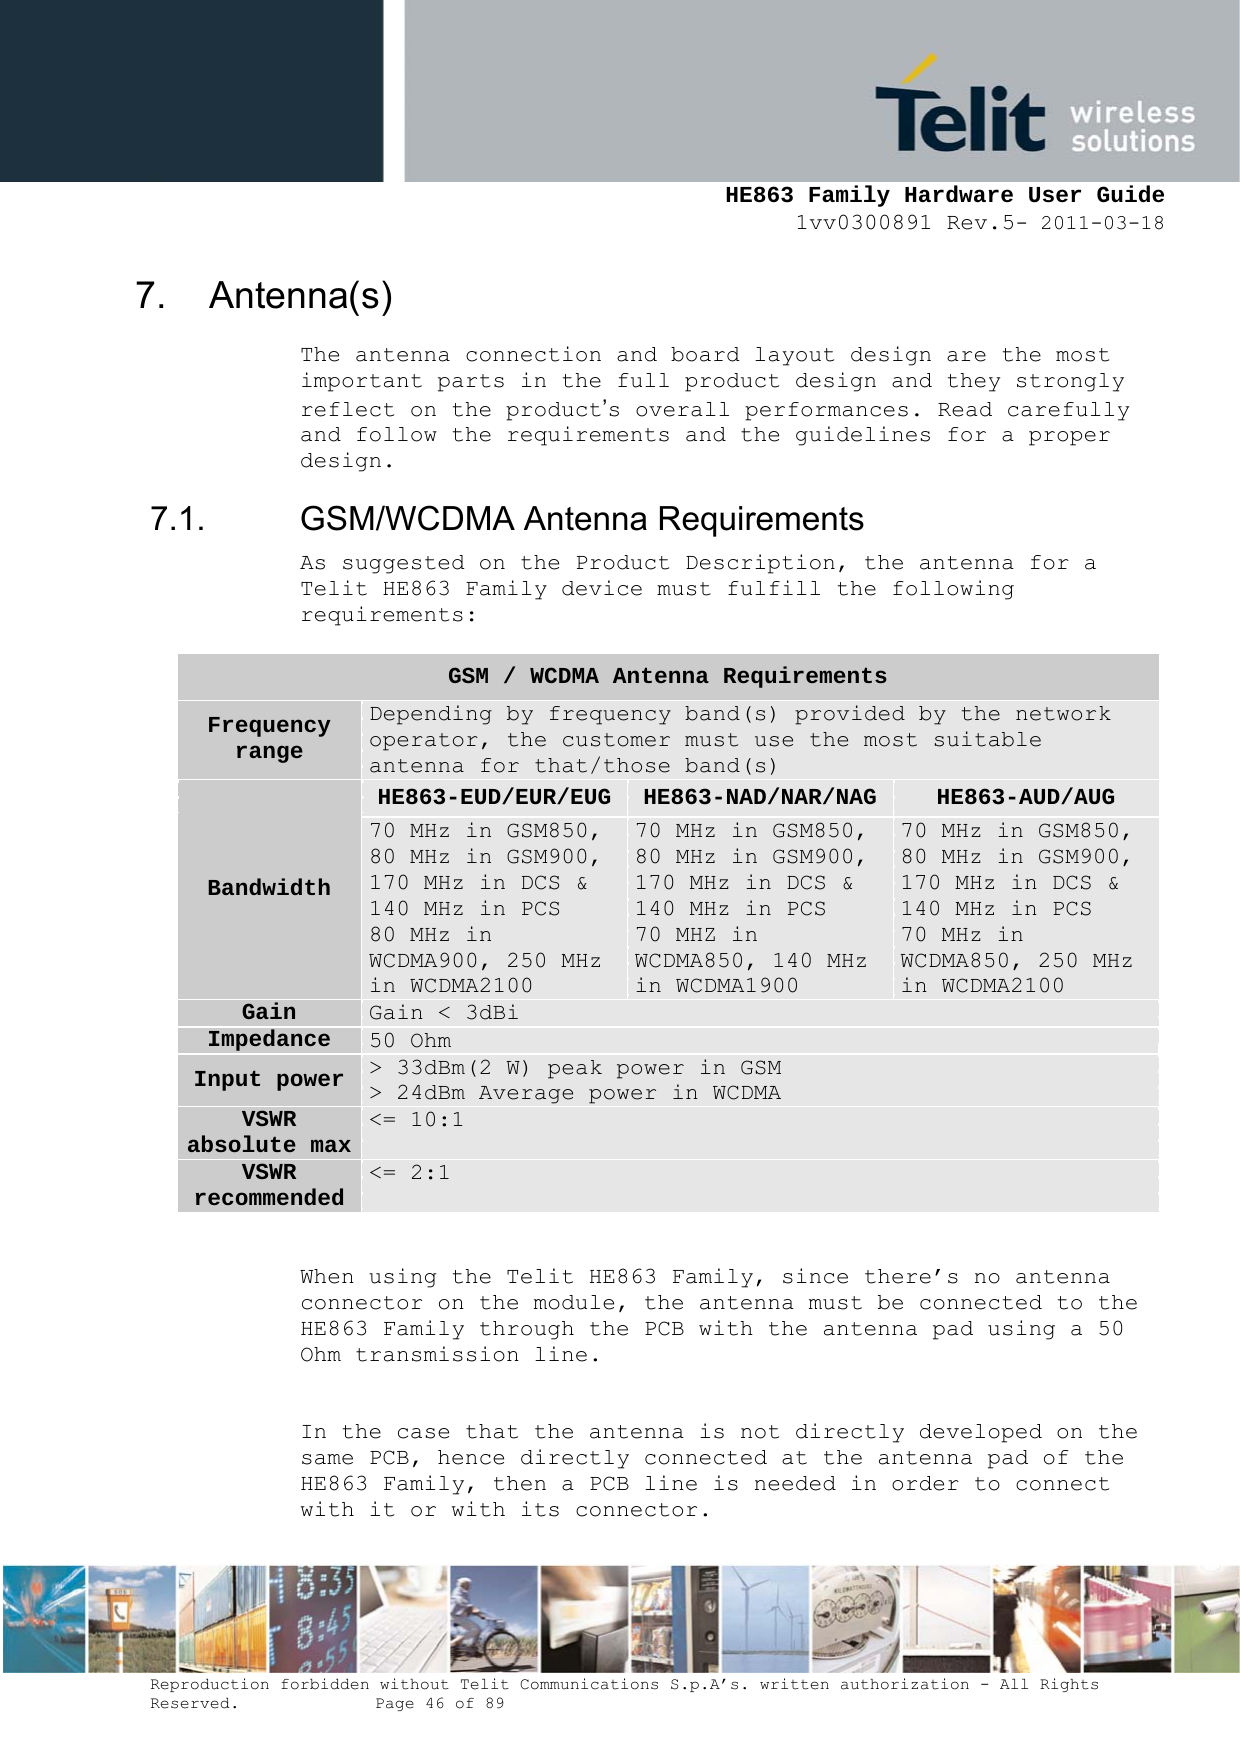     HE863 Family Hardware User Guide 1vv0300891 Rev.5- 2011-03-18    Reproduction forbidden without Telit Communications S.p.A’s. written authorization - All Rights Reserved.    Page 46 of 89  7. Antenna(s) The antenna connection and board layout design are the most important parts in the full product design and they strongly reflect on the product’s overall performances. Read carefully and follow the requirements and the guidelines for a proper design. 7.1. GSM/WCDMA Antenna Requirements As suggested on the Product Description, the antenna for a Telit HE863 Family device must fulfill the following requirements:  When using the Telit HE863 Family, since there’s no antenna connector on the module, the antenna must be connected to the HE863 Family through the PCB with the antenna pad using a 50 Ohm transmission line.  In the case that the antenna is not directly developed on the same PCB, hence directly connected at the antenna pad of the HE863 Family, then a PCB line is needed in order to connect with it or with its connector. GSM / WCDMA Antenna Requirements Frequency range Depending by frequency band(s) provided by the network operator, the customer must use the most suitable antenna for that/those band(s) Bandwidth HE863-EUD/EUR/EUG HE863-NAD/NAR/NAG  HE863-AUD/AUG 70 MHz in GSM850, 80 MHz in GSM900, 170 MHz in DCS &amp; 140 MHz in PCS 80 MHz in WCDMA900, 250 MHz in WCDMA2100 70 MHz in GSM850, 80 MHz in GSM900, 170 MHz in DCS &amp; 140 MHz in PCS 70 MHZ in WCDMA850, 140 MHz in WCDMA1900 70 MHz in GSM850, 80 MHz in GSM900, 170 MHz in DCS &amp; 140 MHz in PCS 70 MHz in WCDMA850, 250 MHz in WCDMA2100 Gain  Gain &lt; 3dBi Impedance  50 Ohm Input power  &gt; 33dBm(2 W) peak power in GSM &gt; 24dBm Average power in WCDMA VSWR absolute max &lt;= 10:1 VSWR recommended &lt;= 2:1 